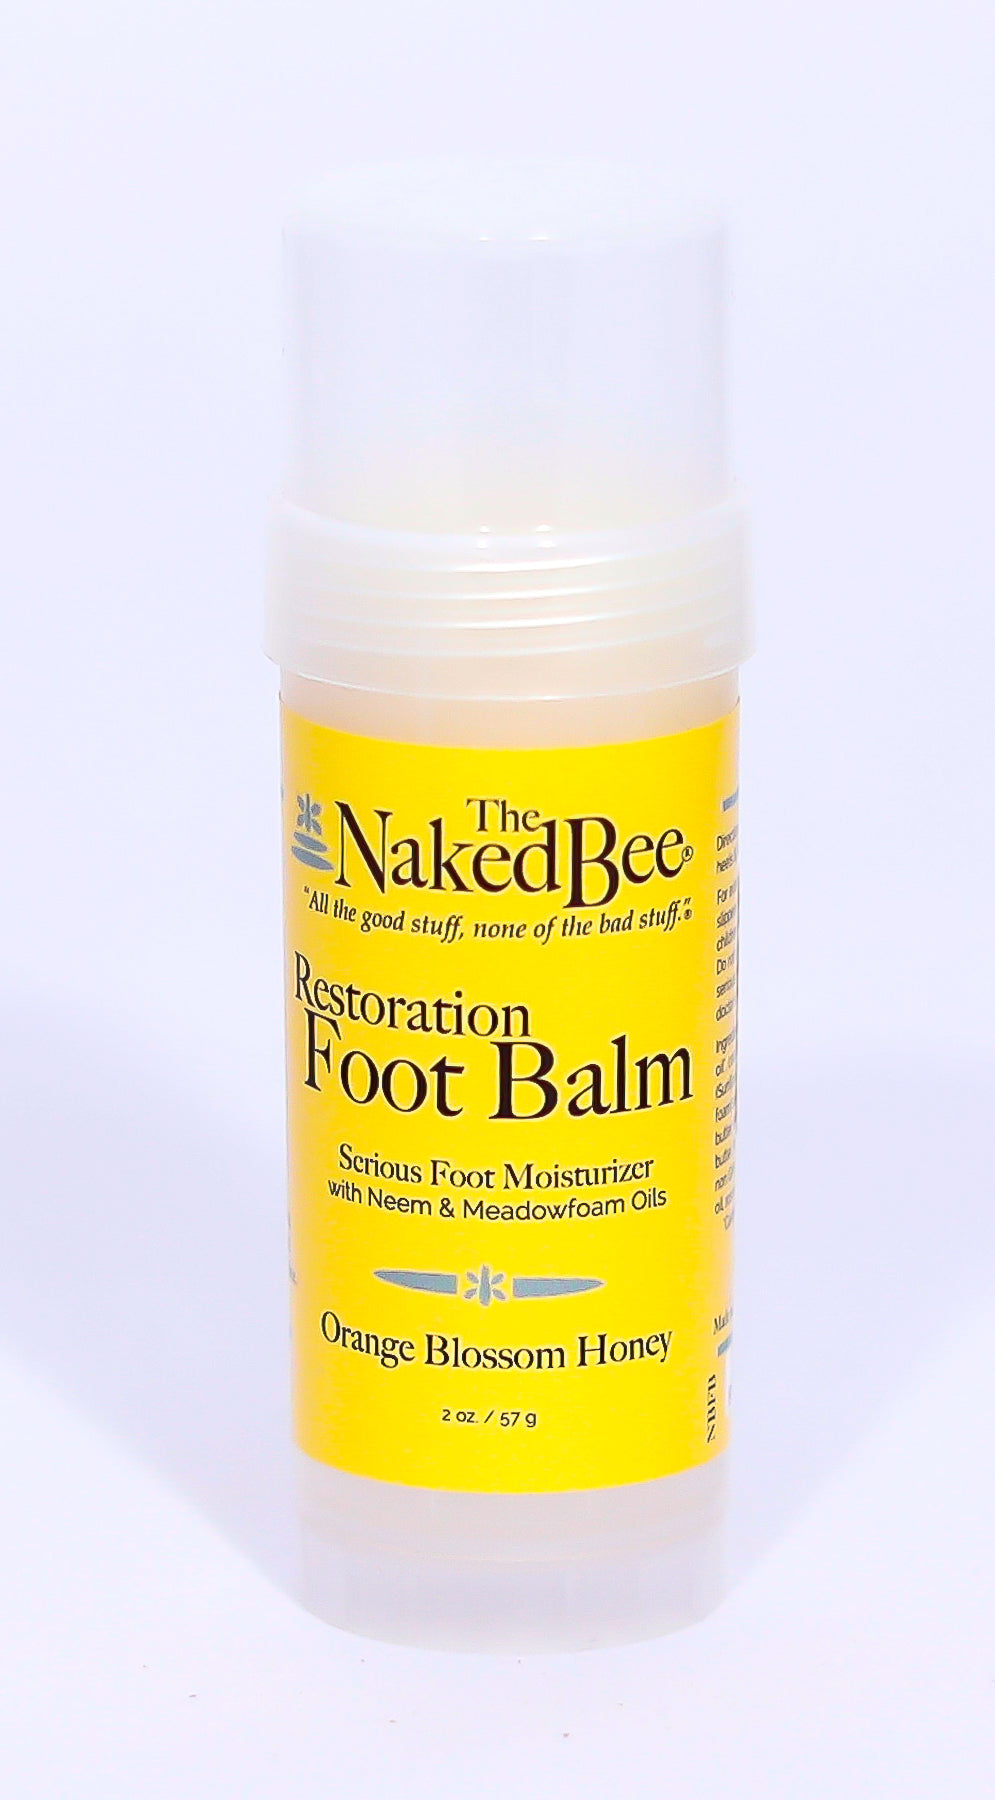 Restoration Foot Balm by the Naked Bee - Pharm Favorites by Economy Pharmacy